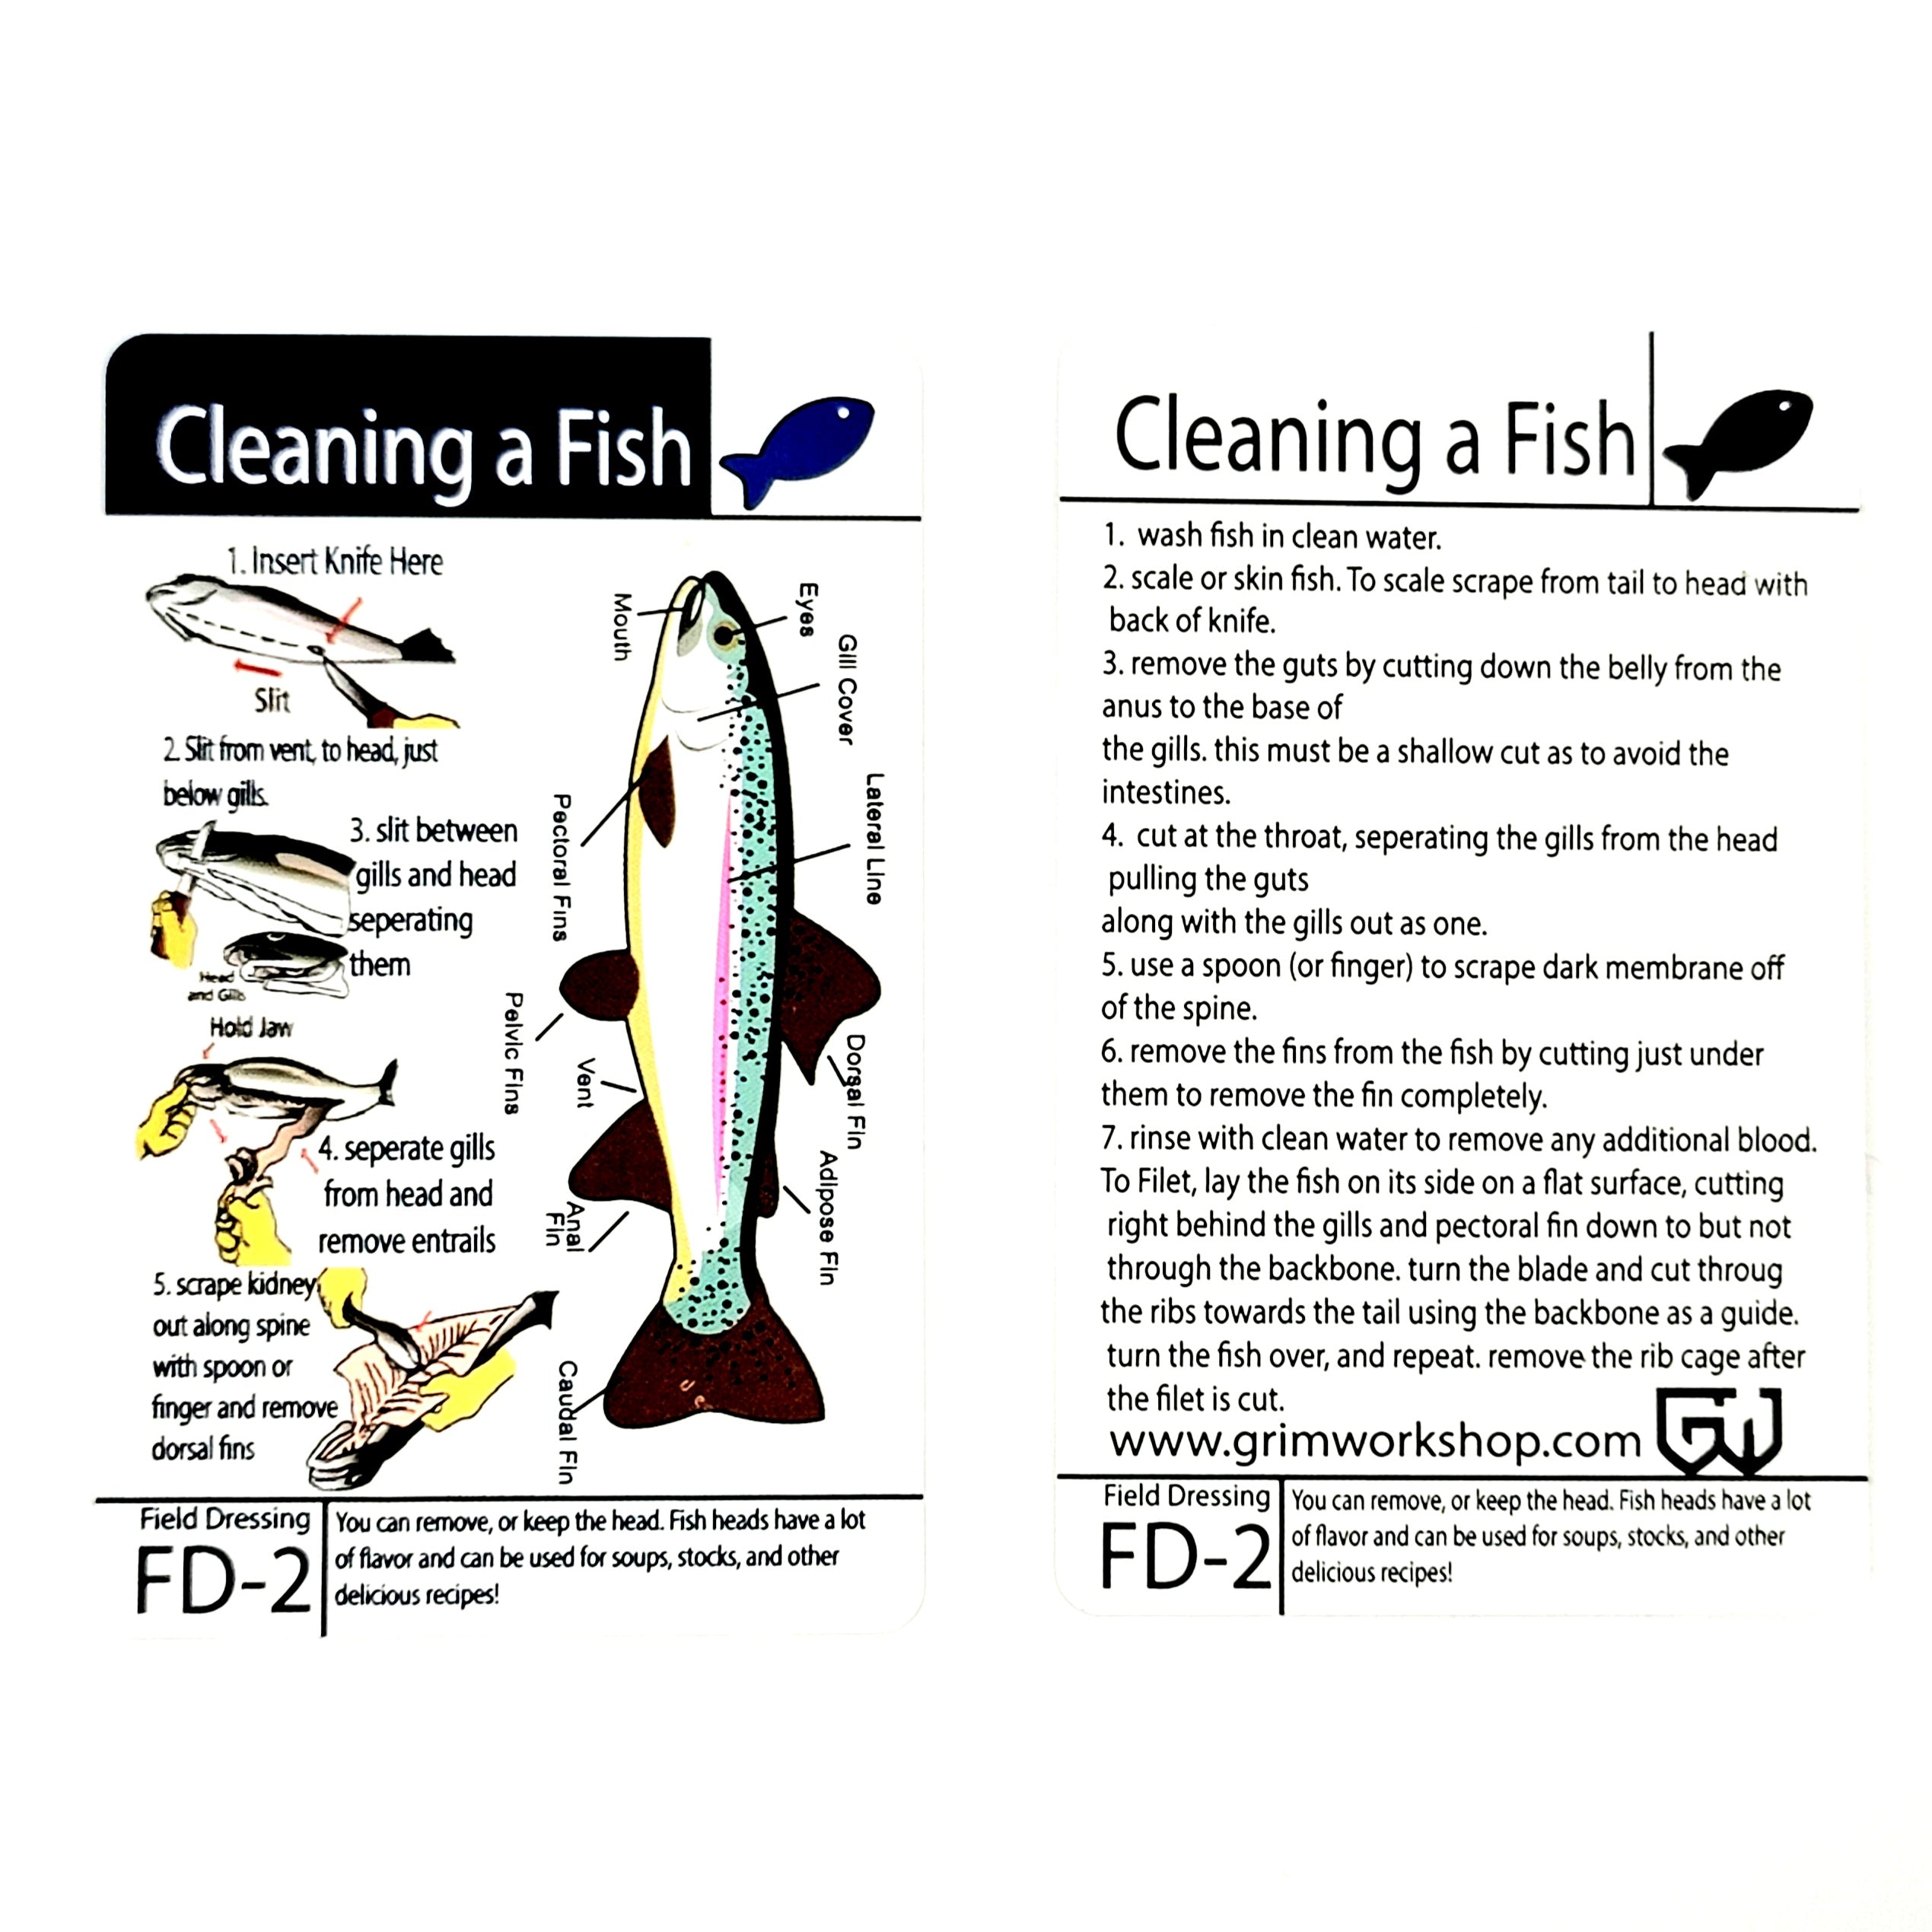 Tip Card FD-2: How to Field Dress a Fish